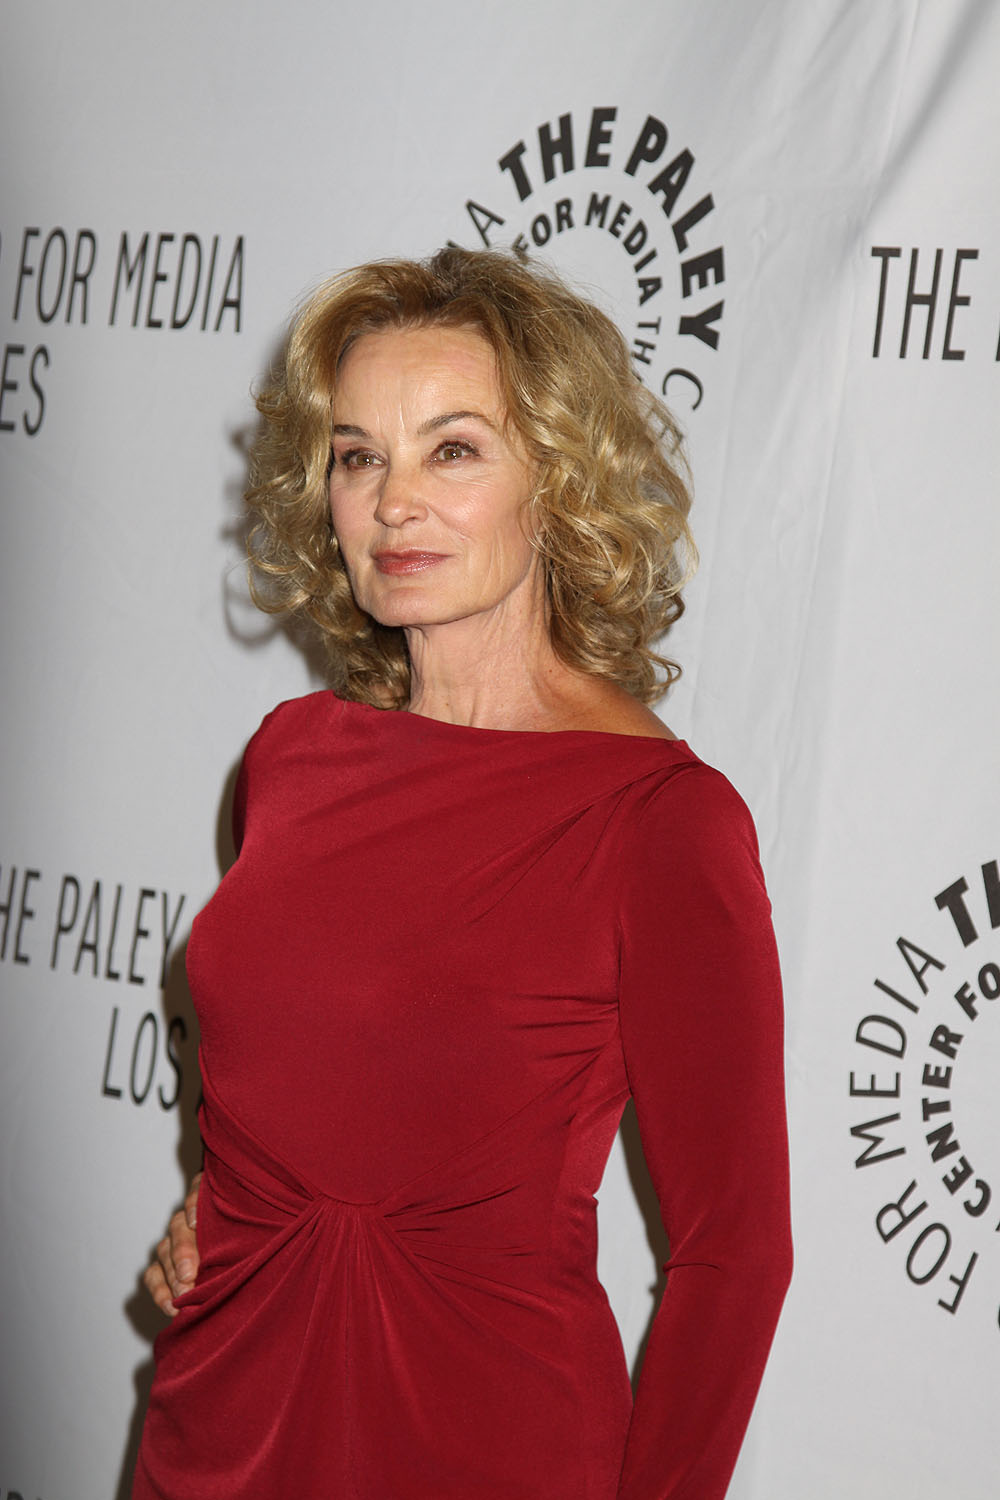 Jessica Lange at The PaleyFest 2012 for Media Honors AMERICAN HORROR STORY ...